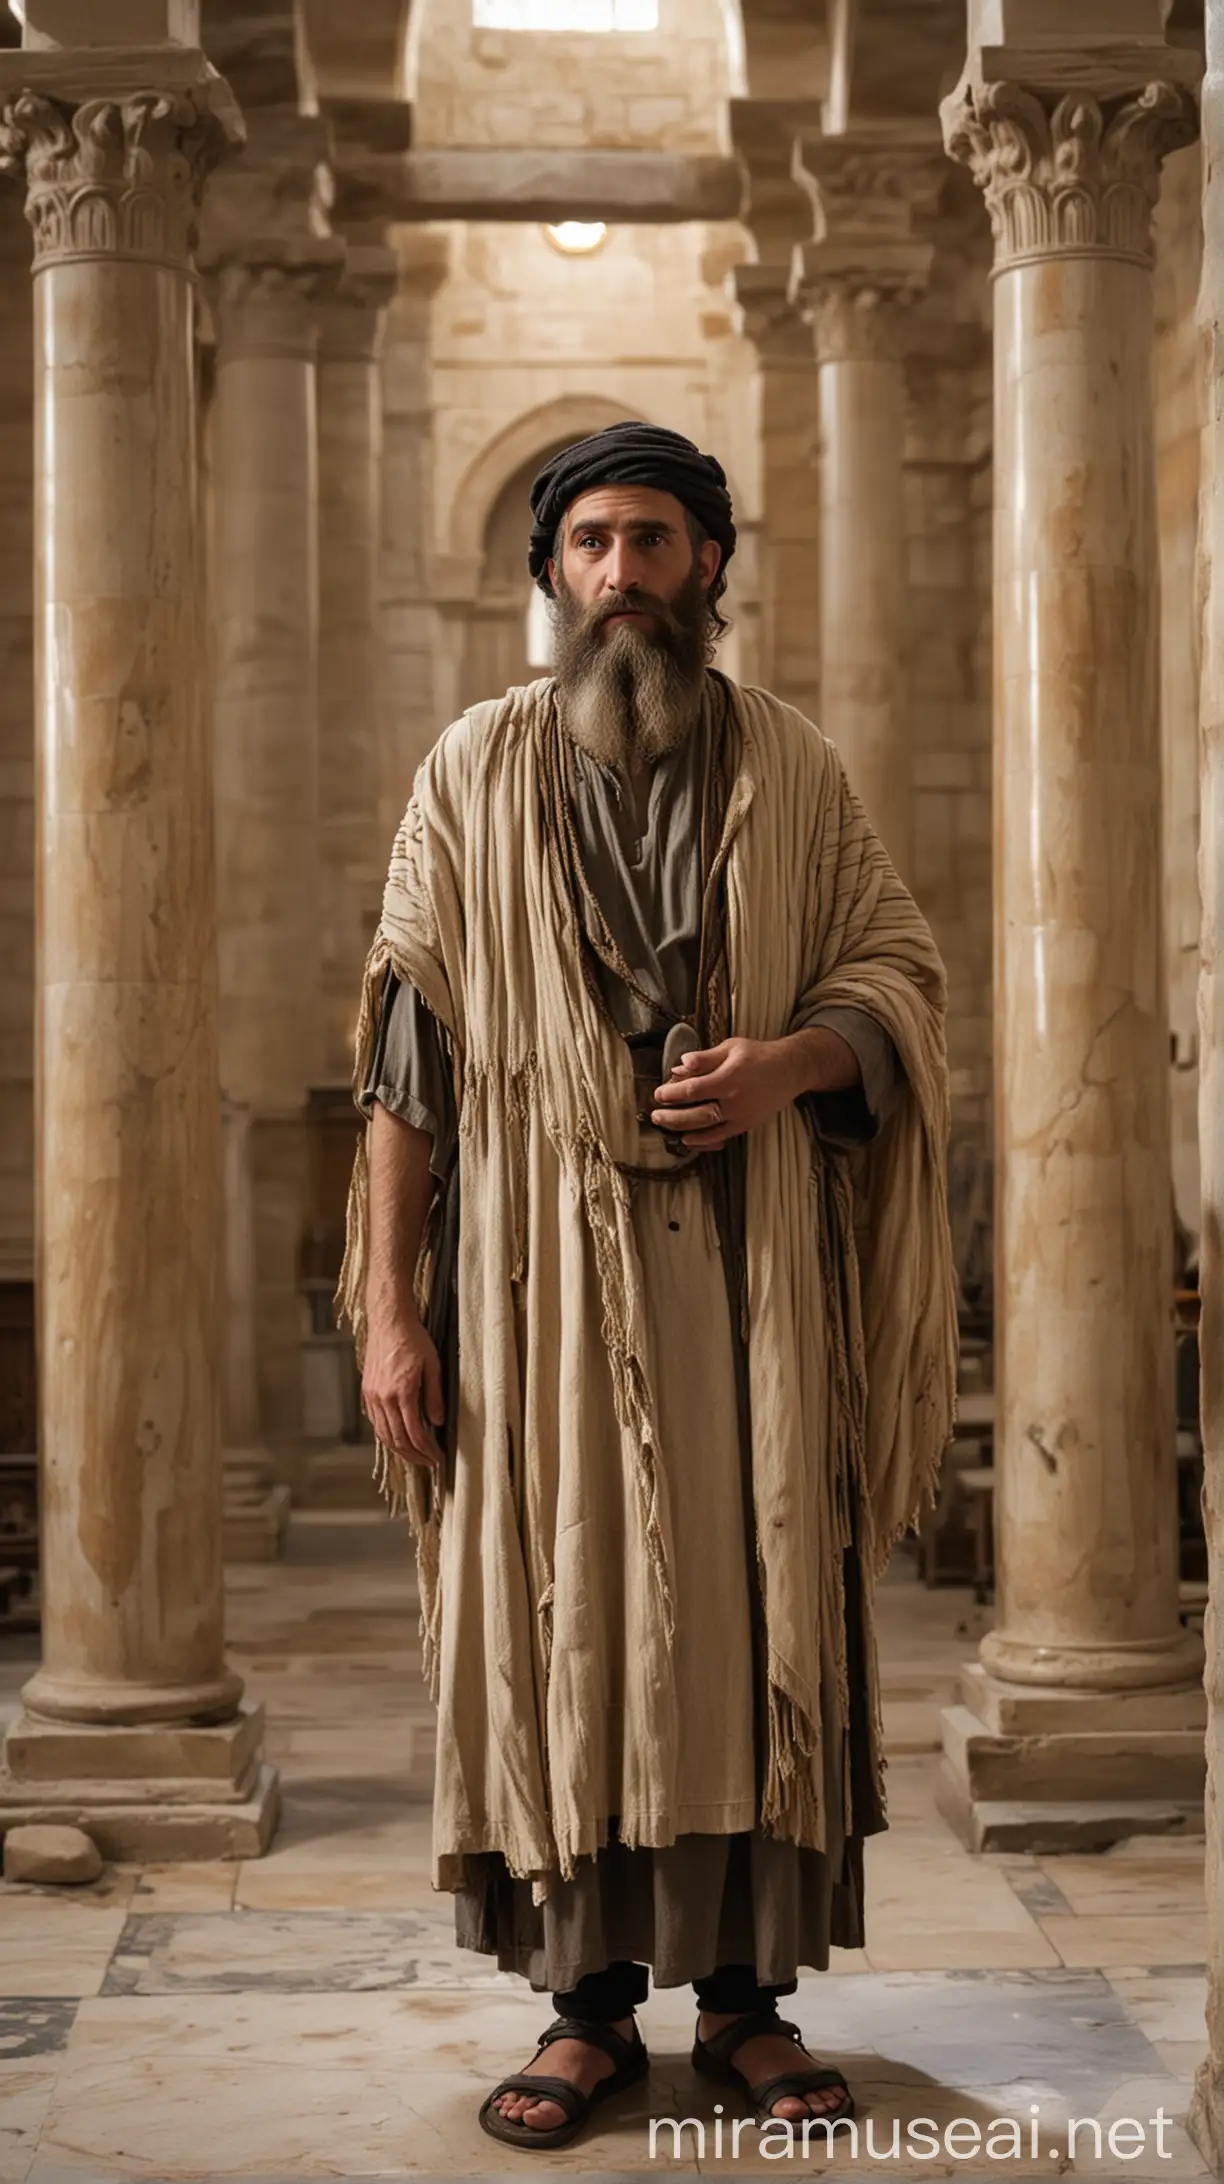 Levite Standing in Ancient Synagogue Historical Religious Figure in Place of Worship